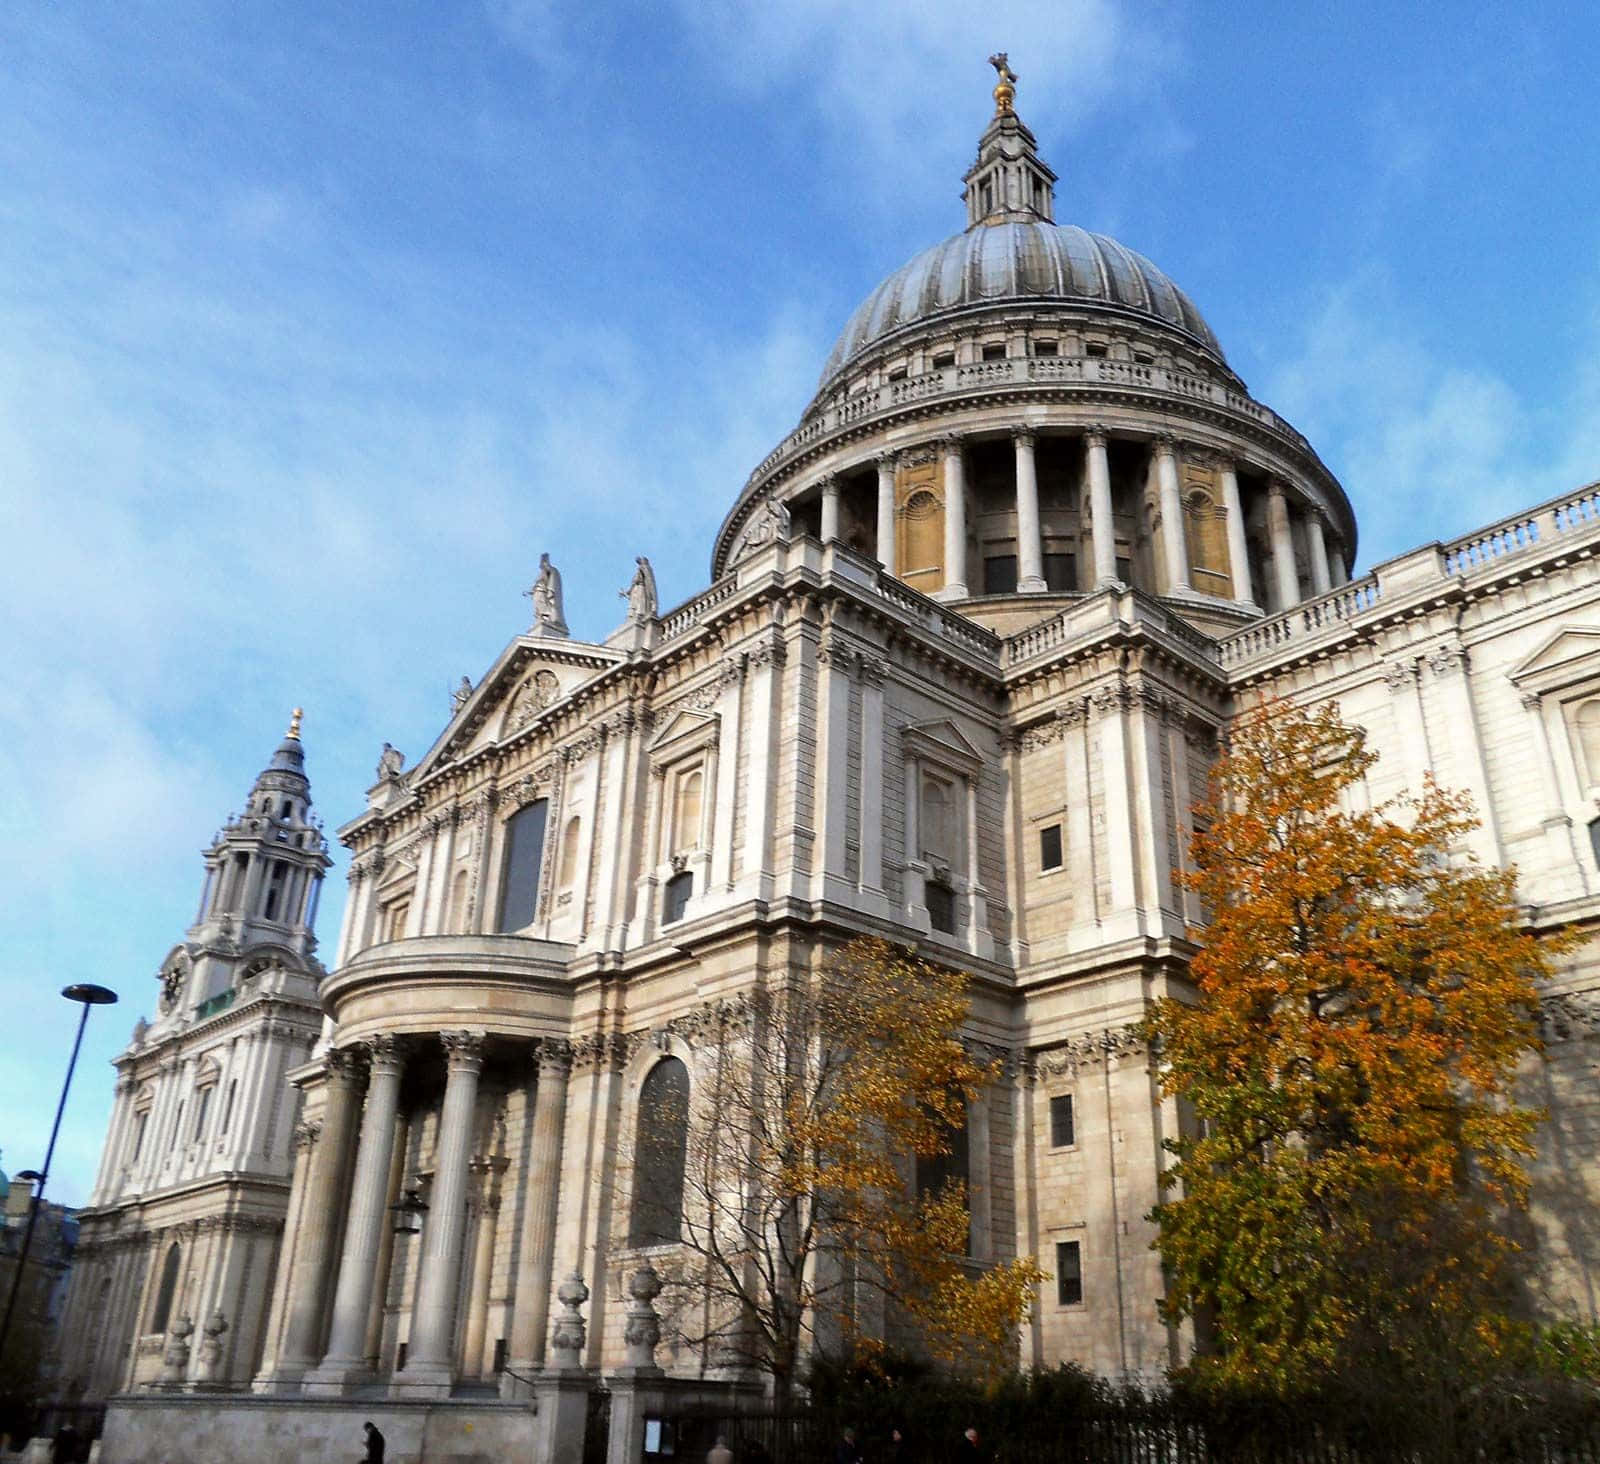 St. Paul's Cathedral English Baroque Architecture Wallpaper